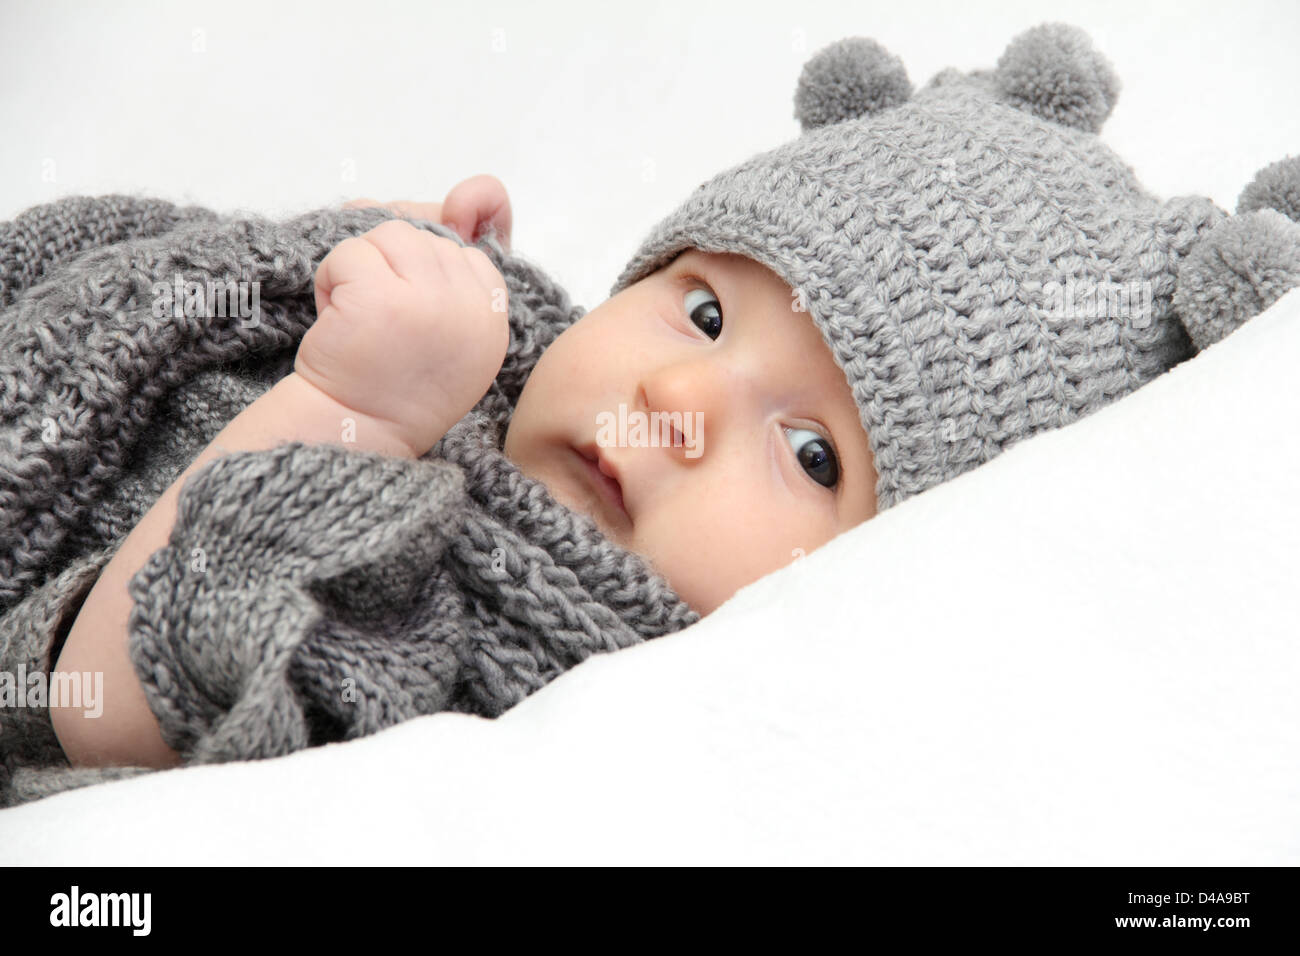 Beautiful baby in gray knitted hat Stock Photo